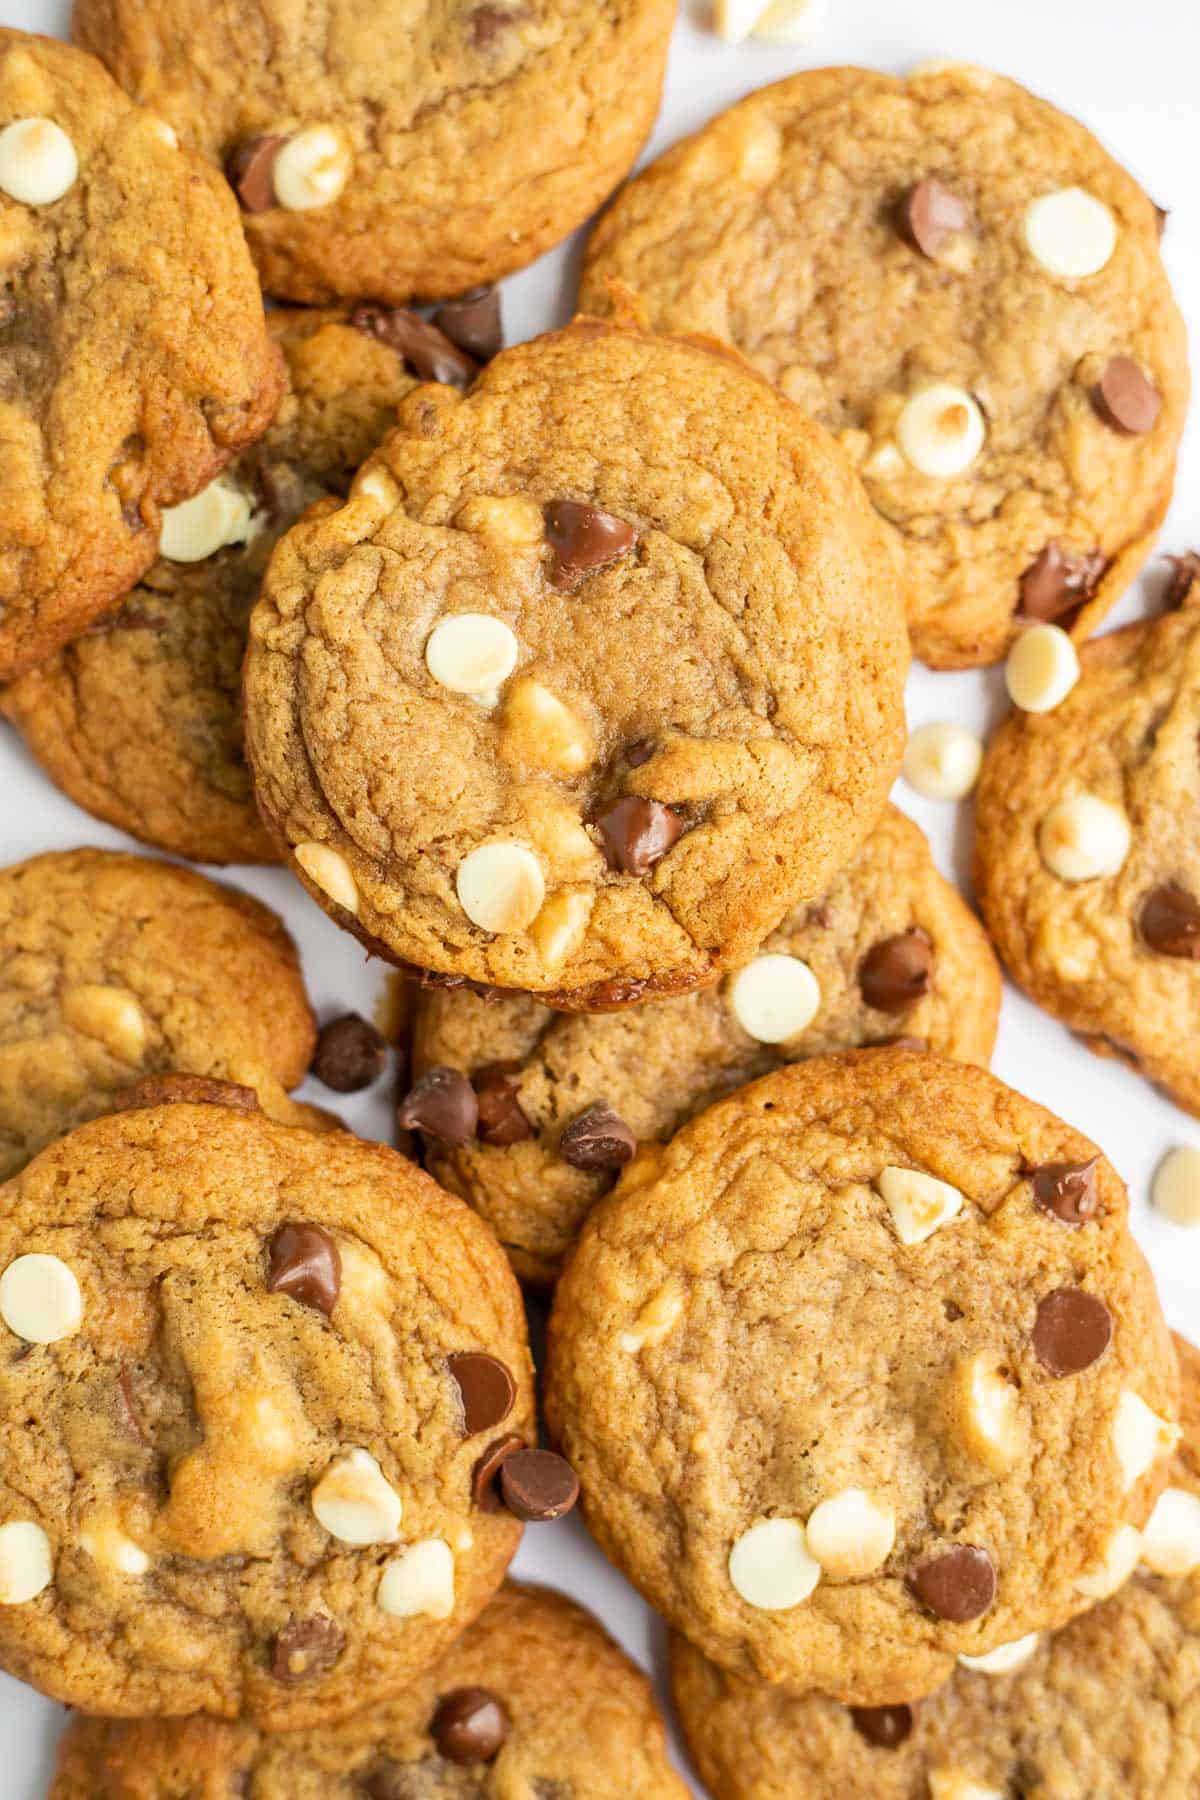 maple syrup chocolate chip cookies with white chocolate spread out on a white backdrop.